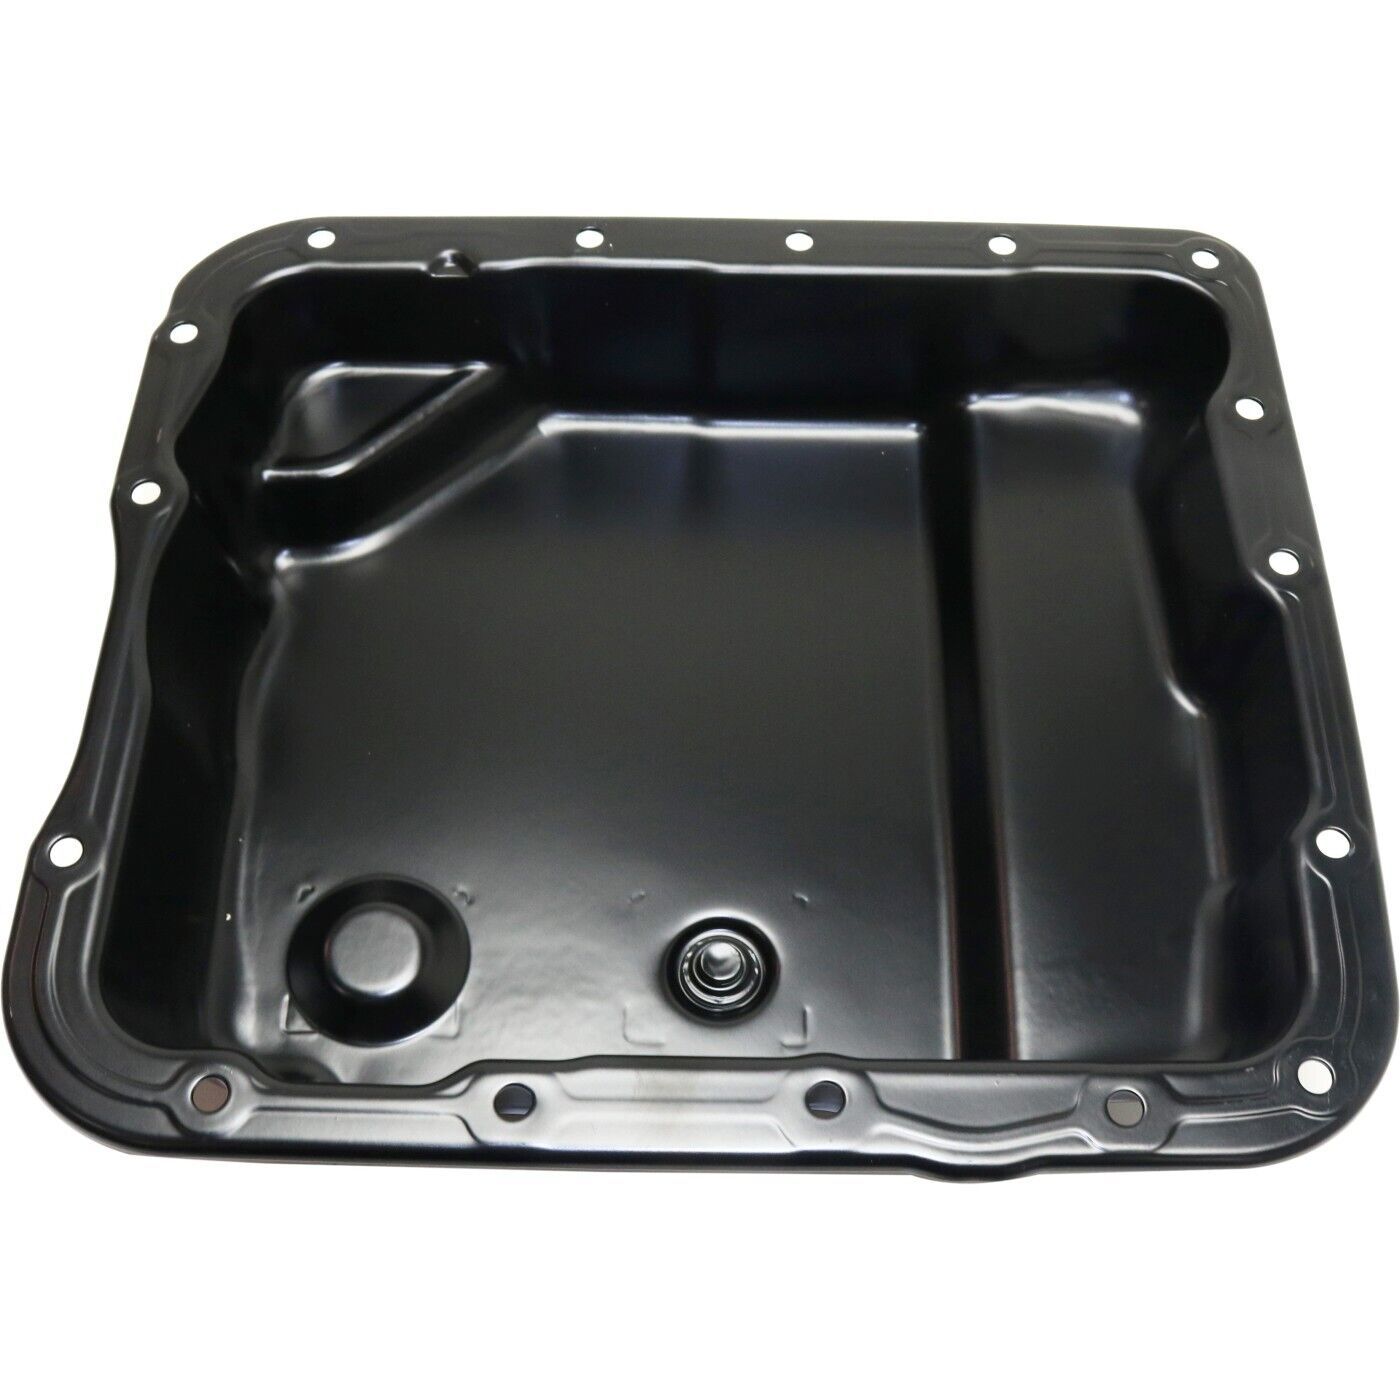 4L60E Transmission Oil Pan New for Cadillac Chevy GMC Hummer Olds Pontiac